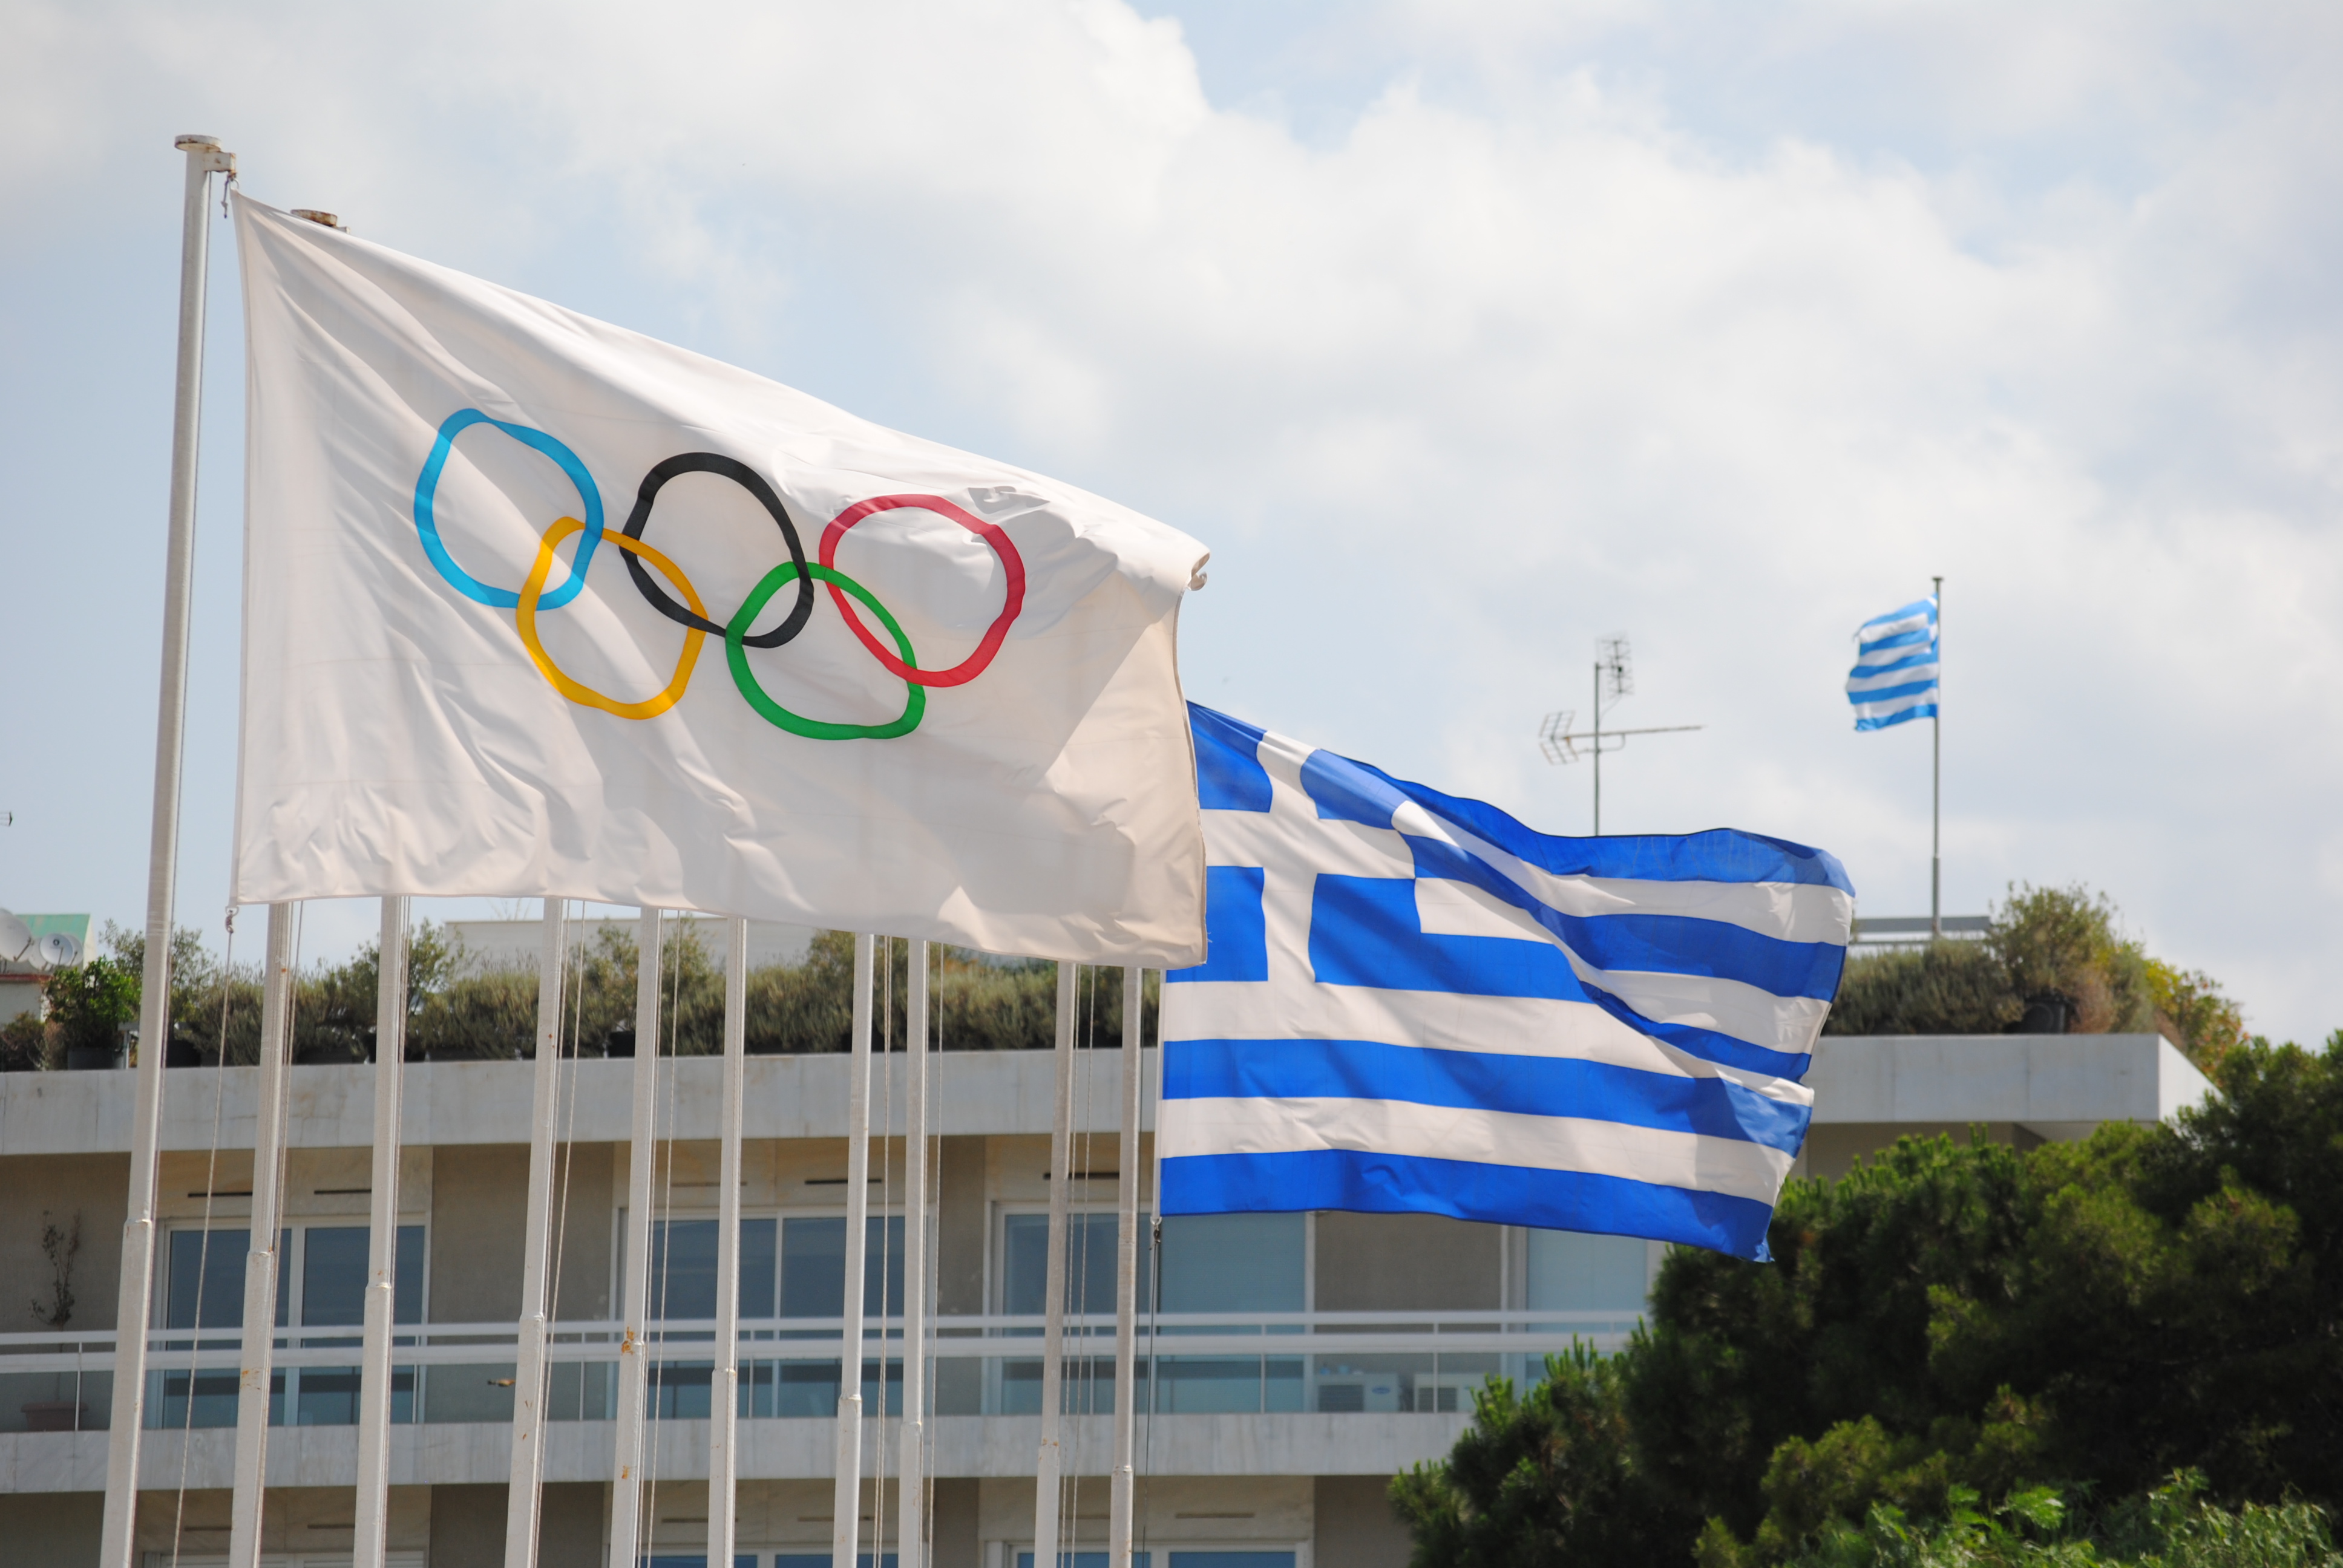 Panathenaic Stadium in Athens, Greece: Home of the First Modern Olympics